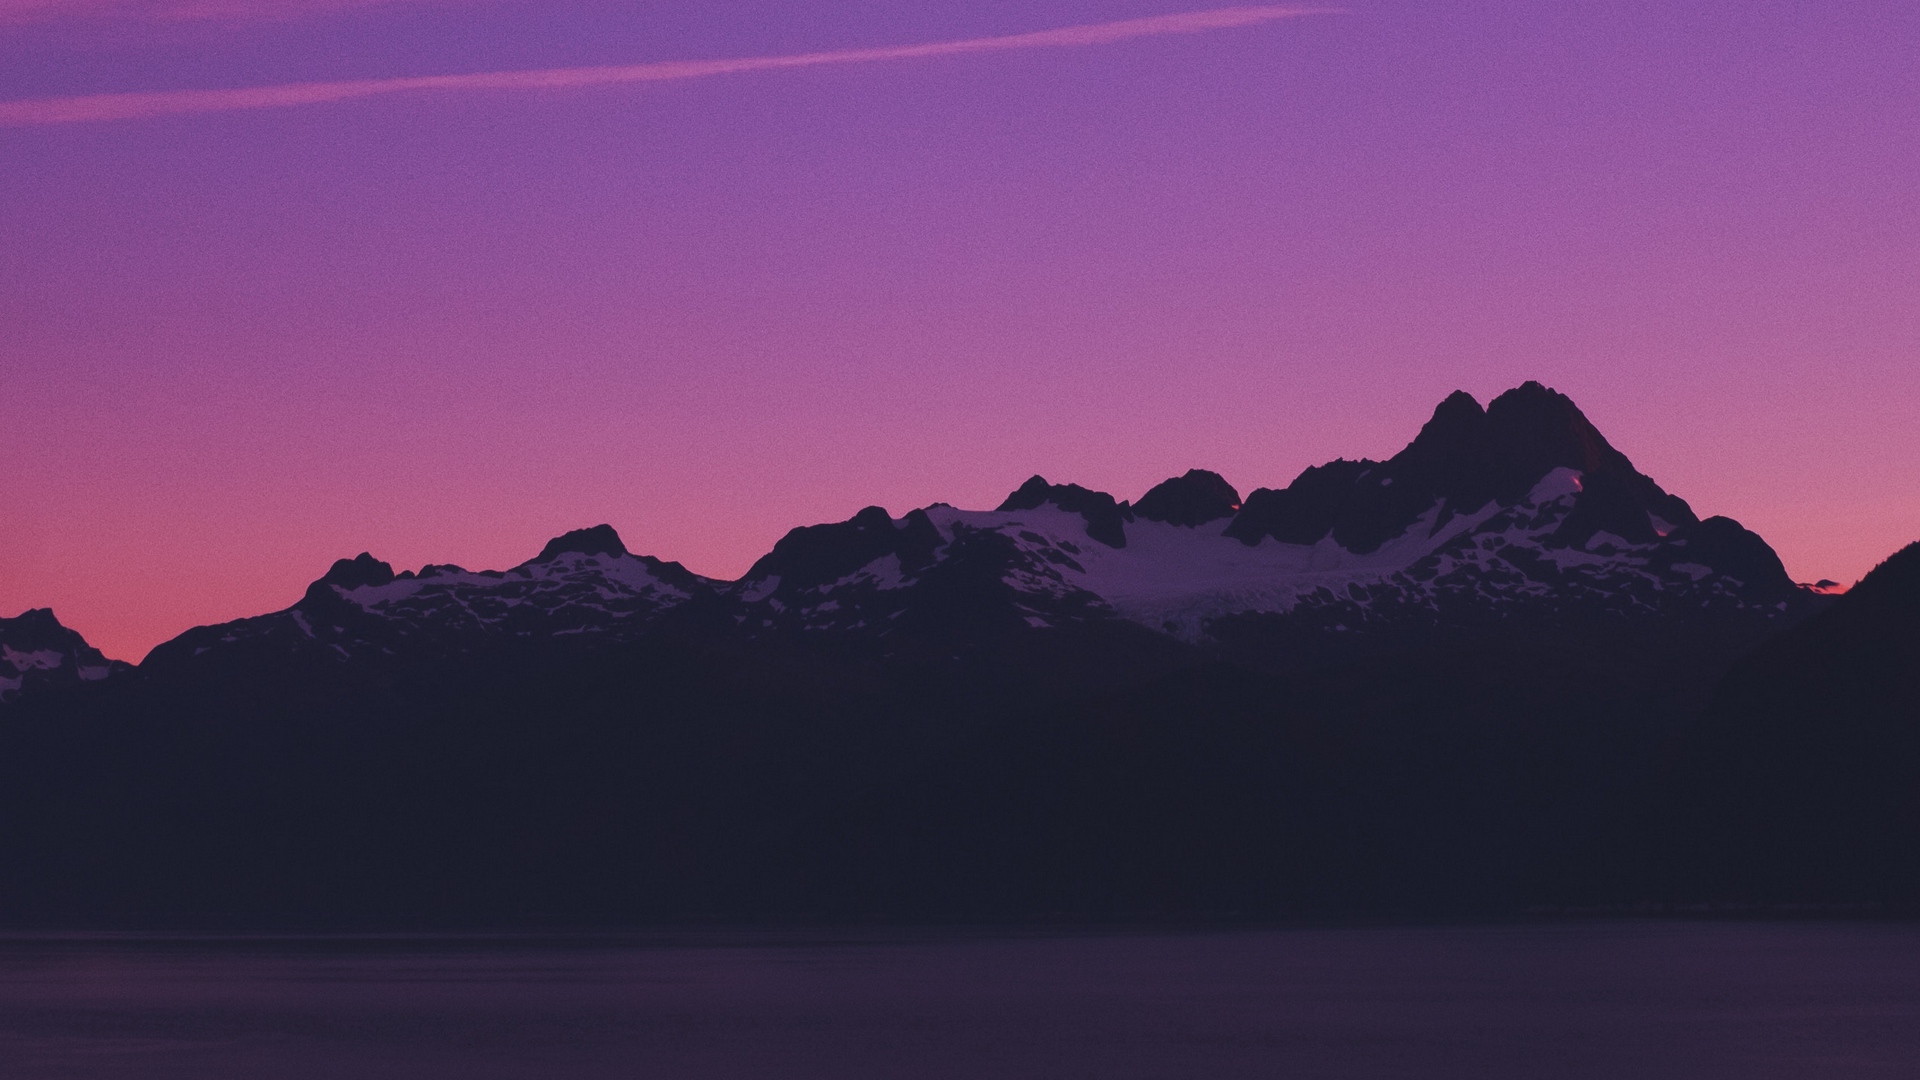 Wallpaper Mountains, Sky, Evening, Twilight, Purple, - Smile For Good Morning Quote - HD Wallpaper 